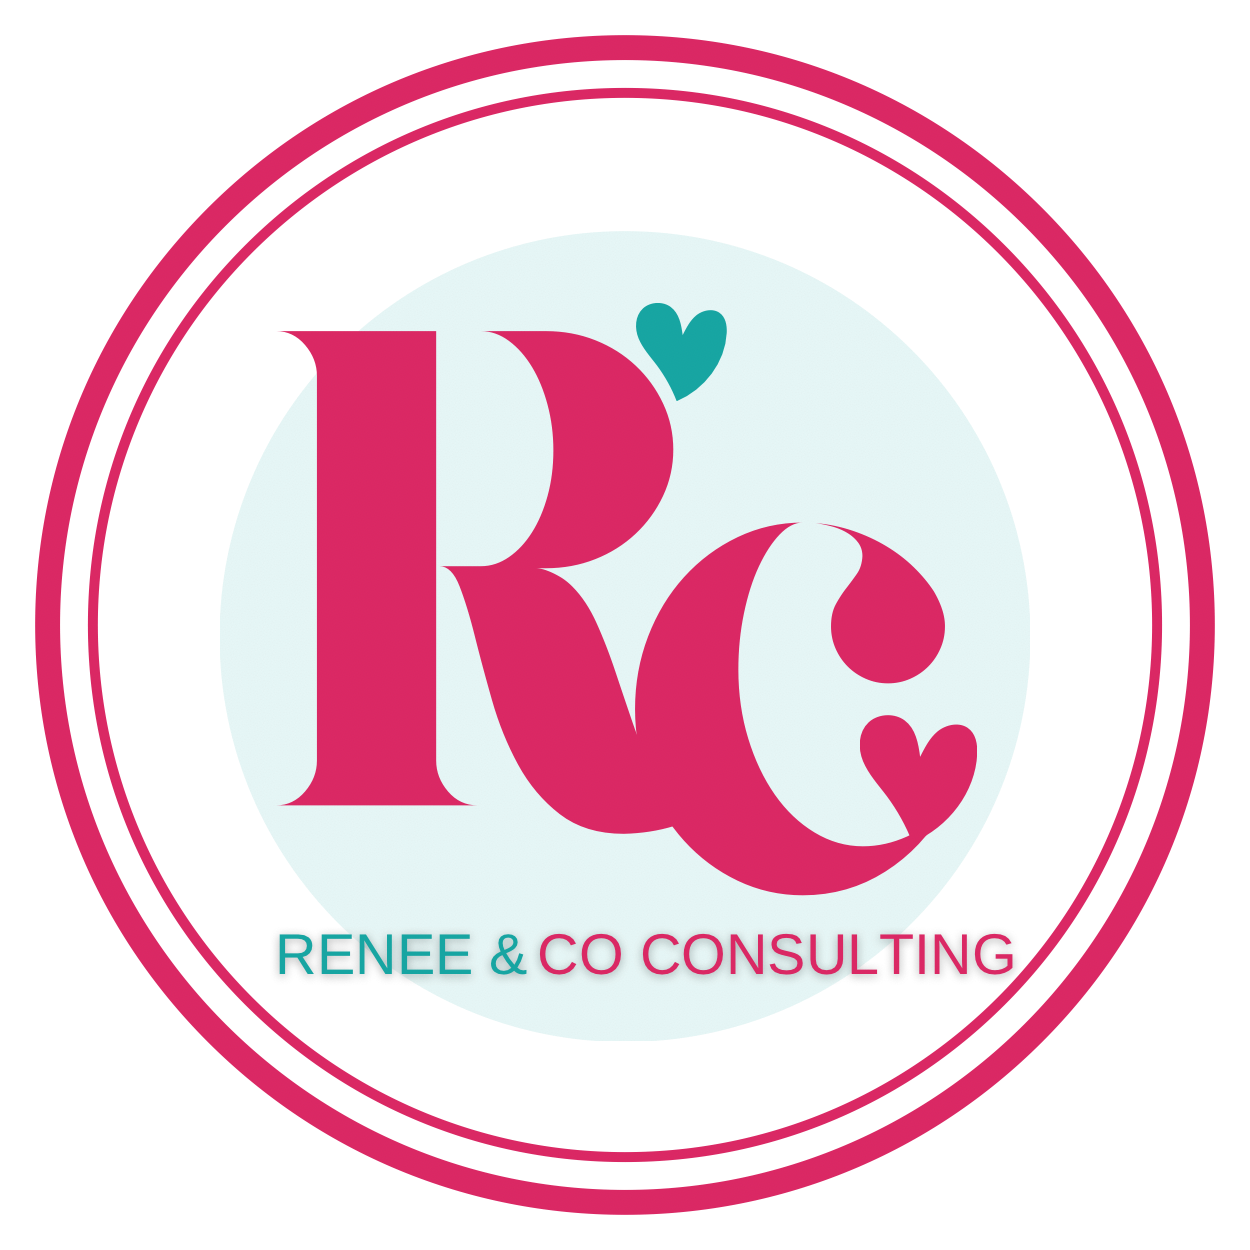 Renee & Co Consulting